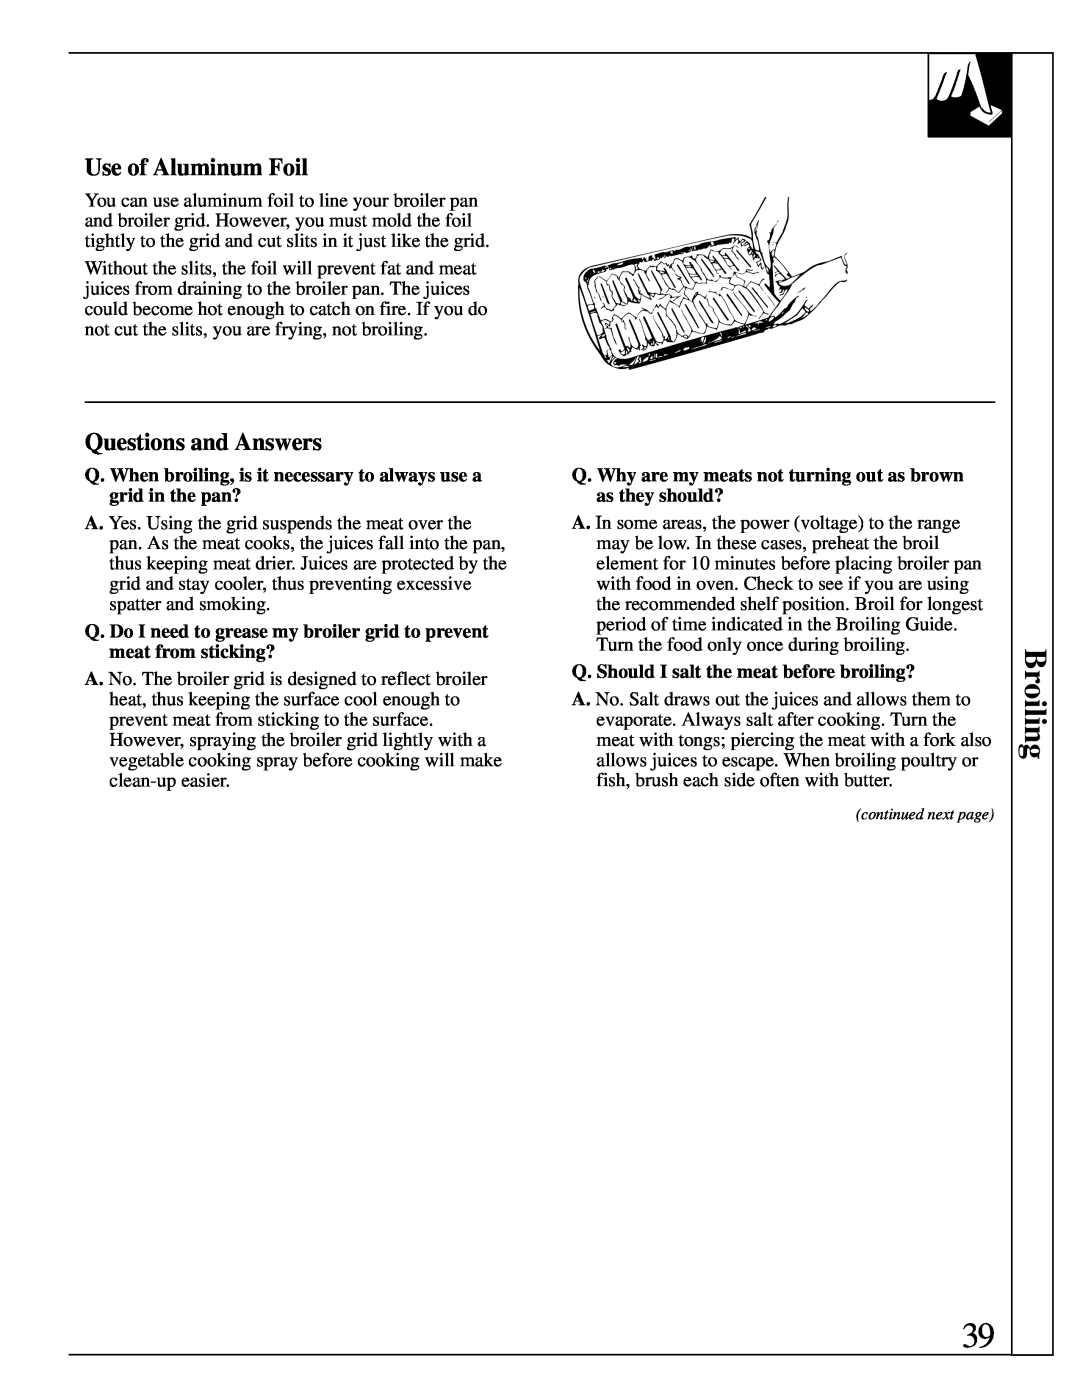 GE JBP95 warranty Broiling, Use of Aluminum Foil, Questions and Answers 